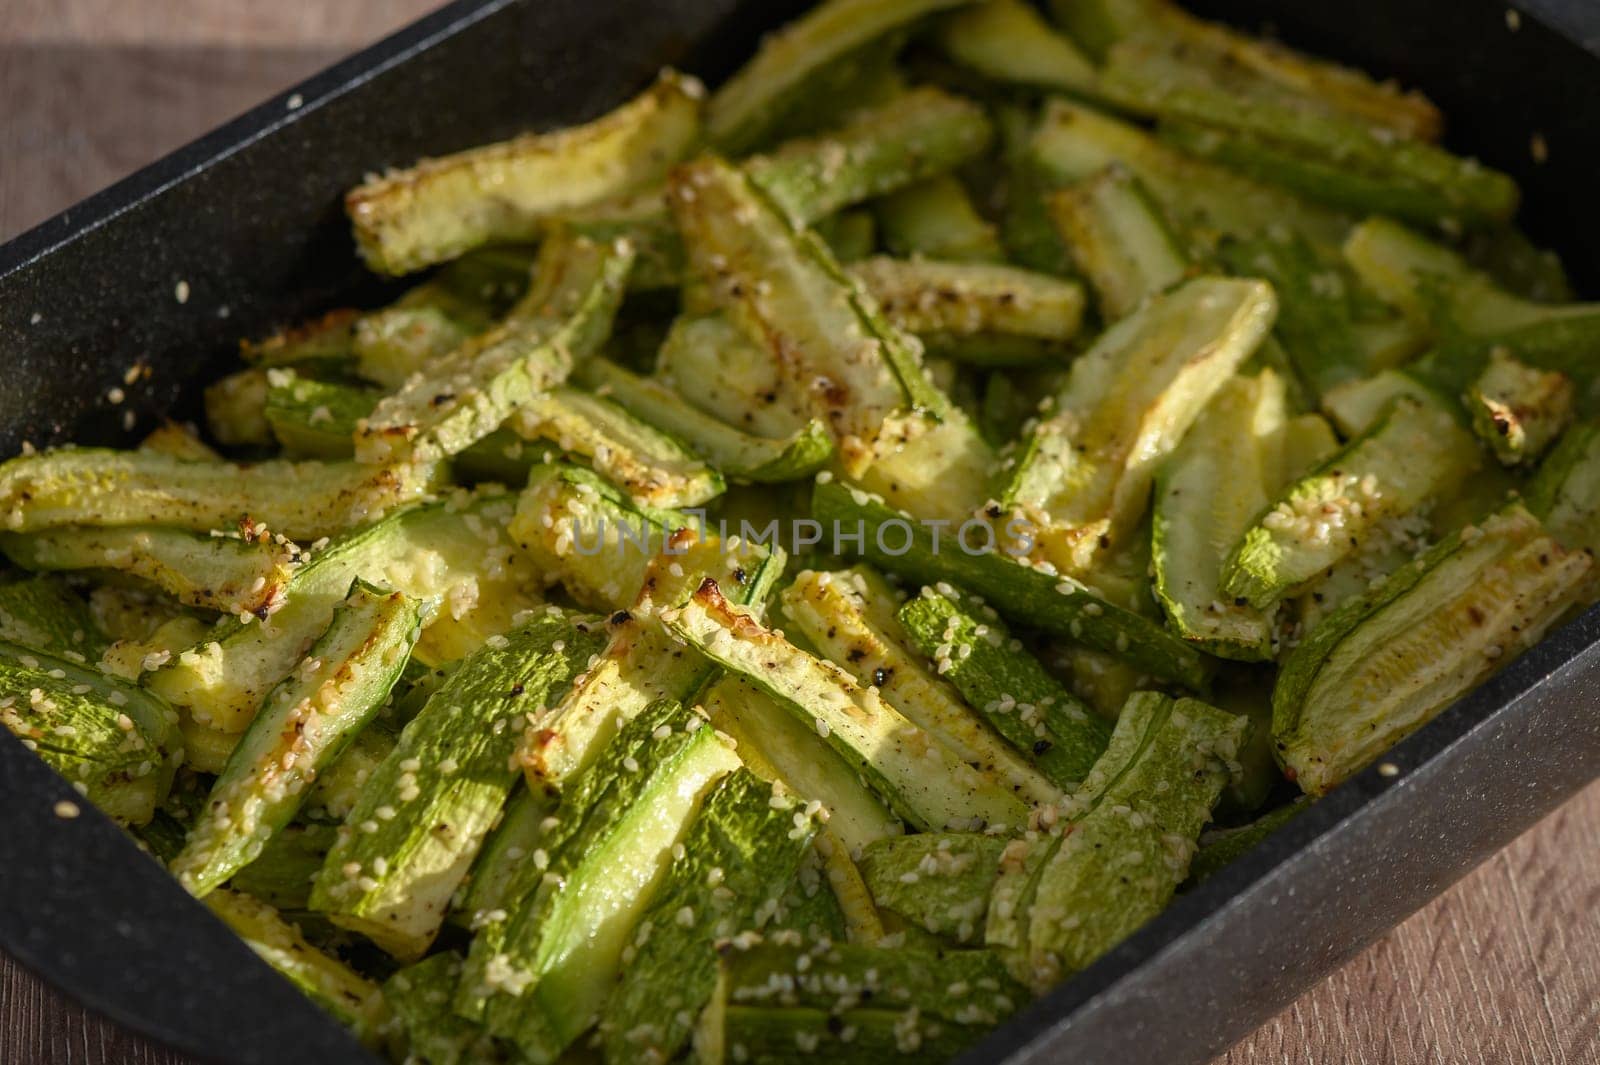 zucchini baked in the oven on a wooden table 2